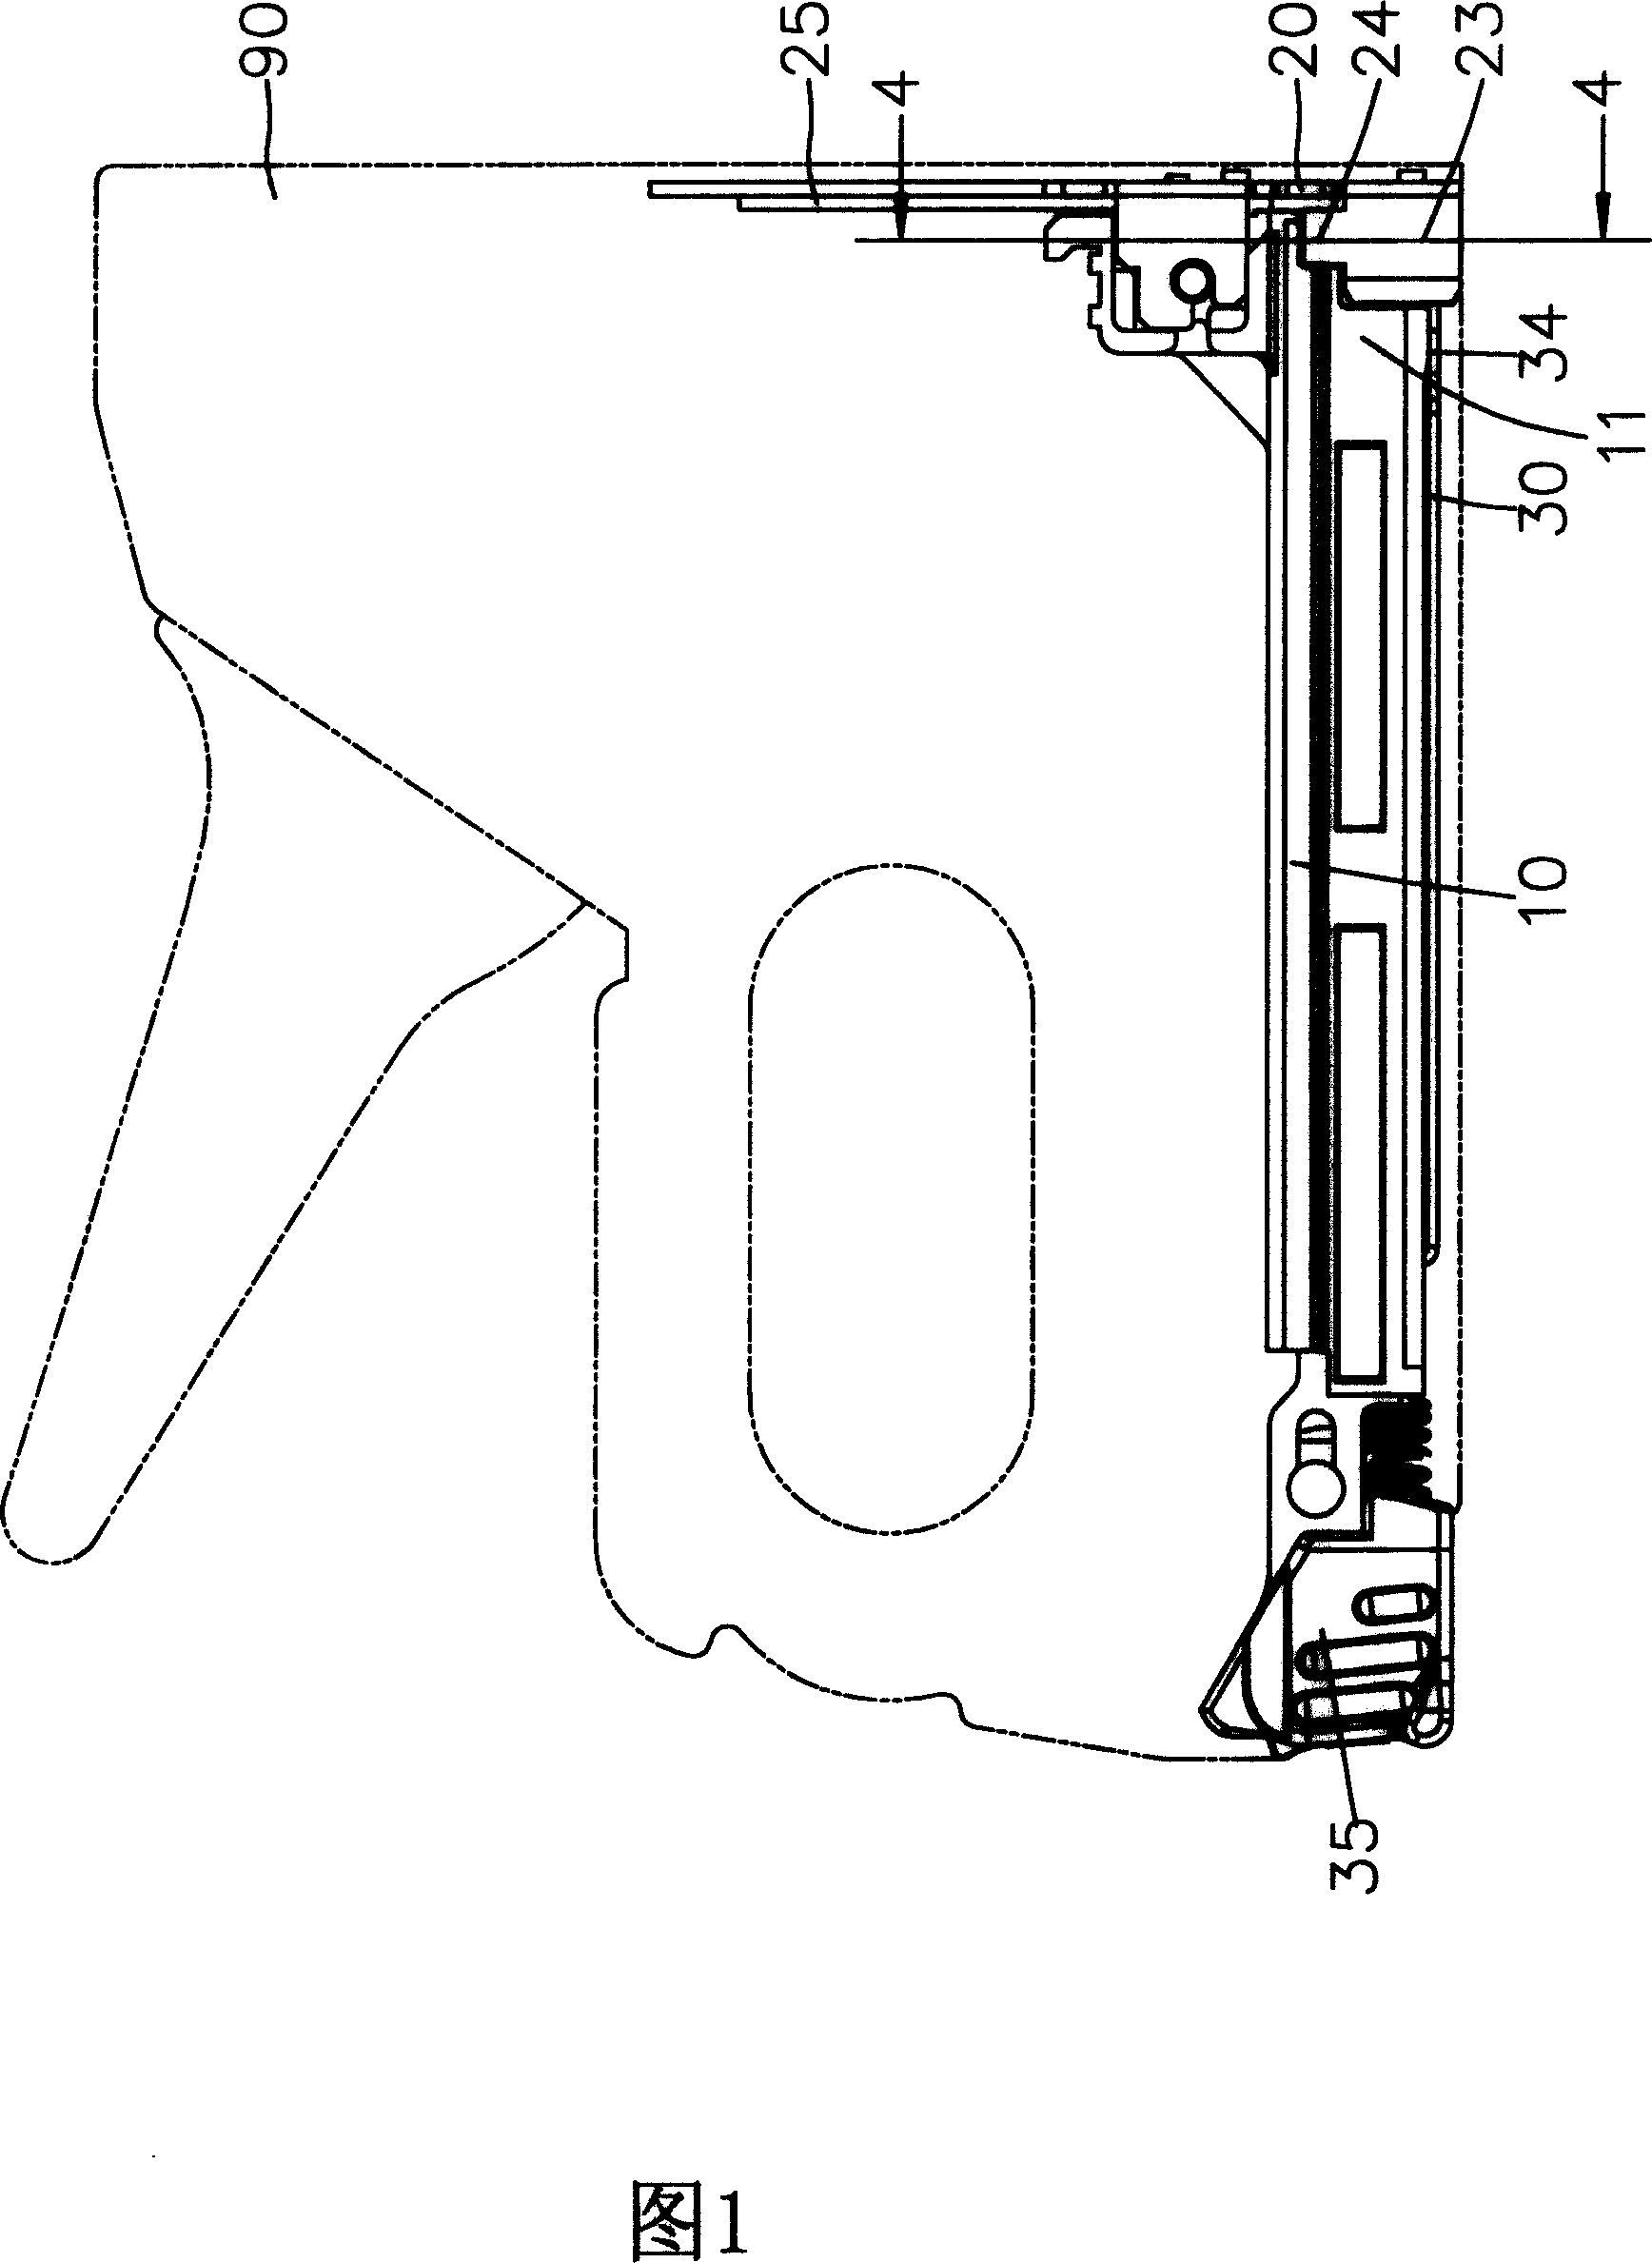 Improved structure of nail-slot nail-ejection of nailing machine